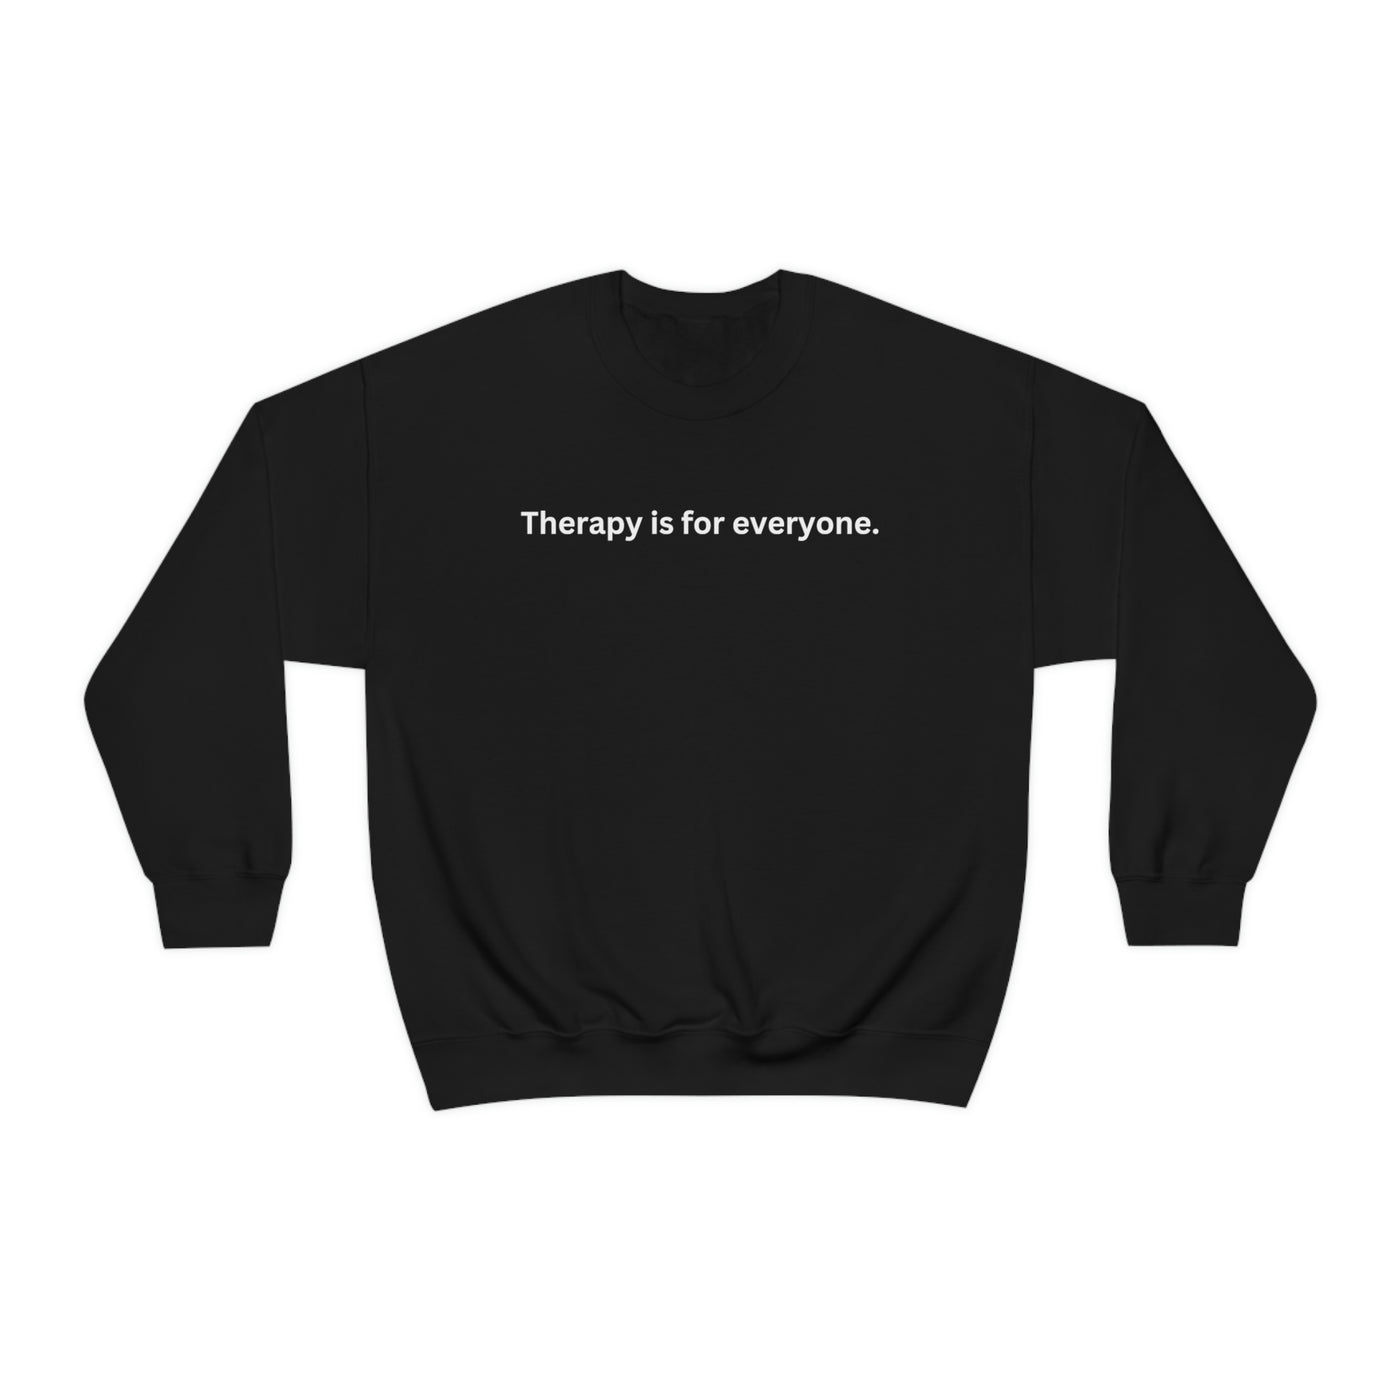 Therapy is for Everyone1 Unisex Sweatshirt